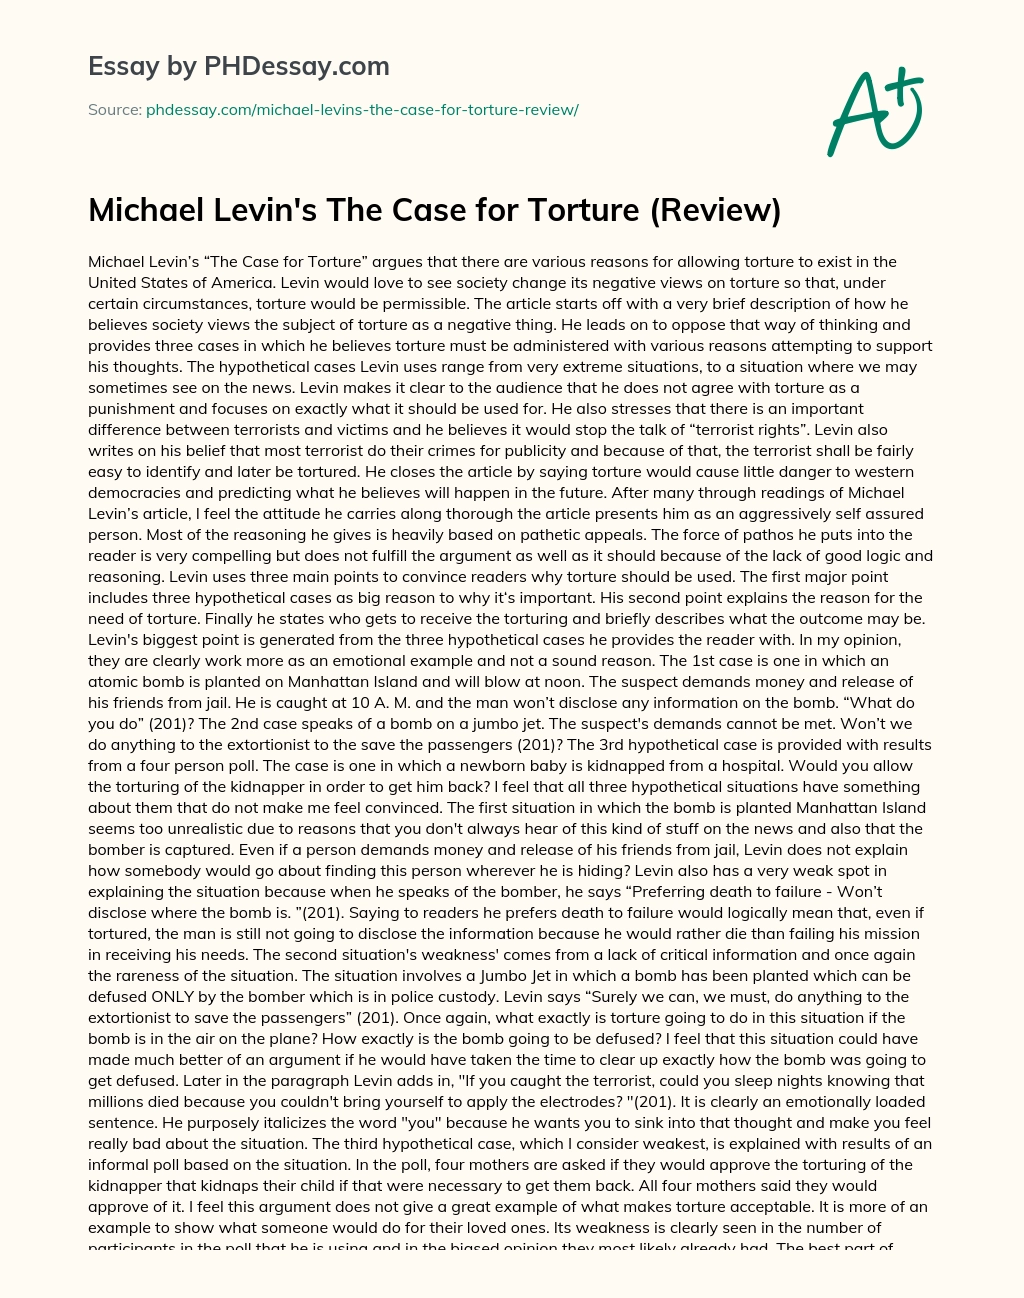 Michael Levin’s The Case for Torture (Review) essay